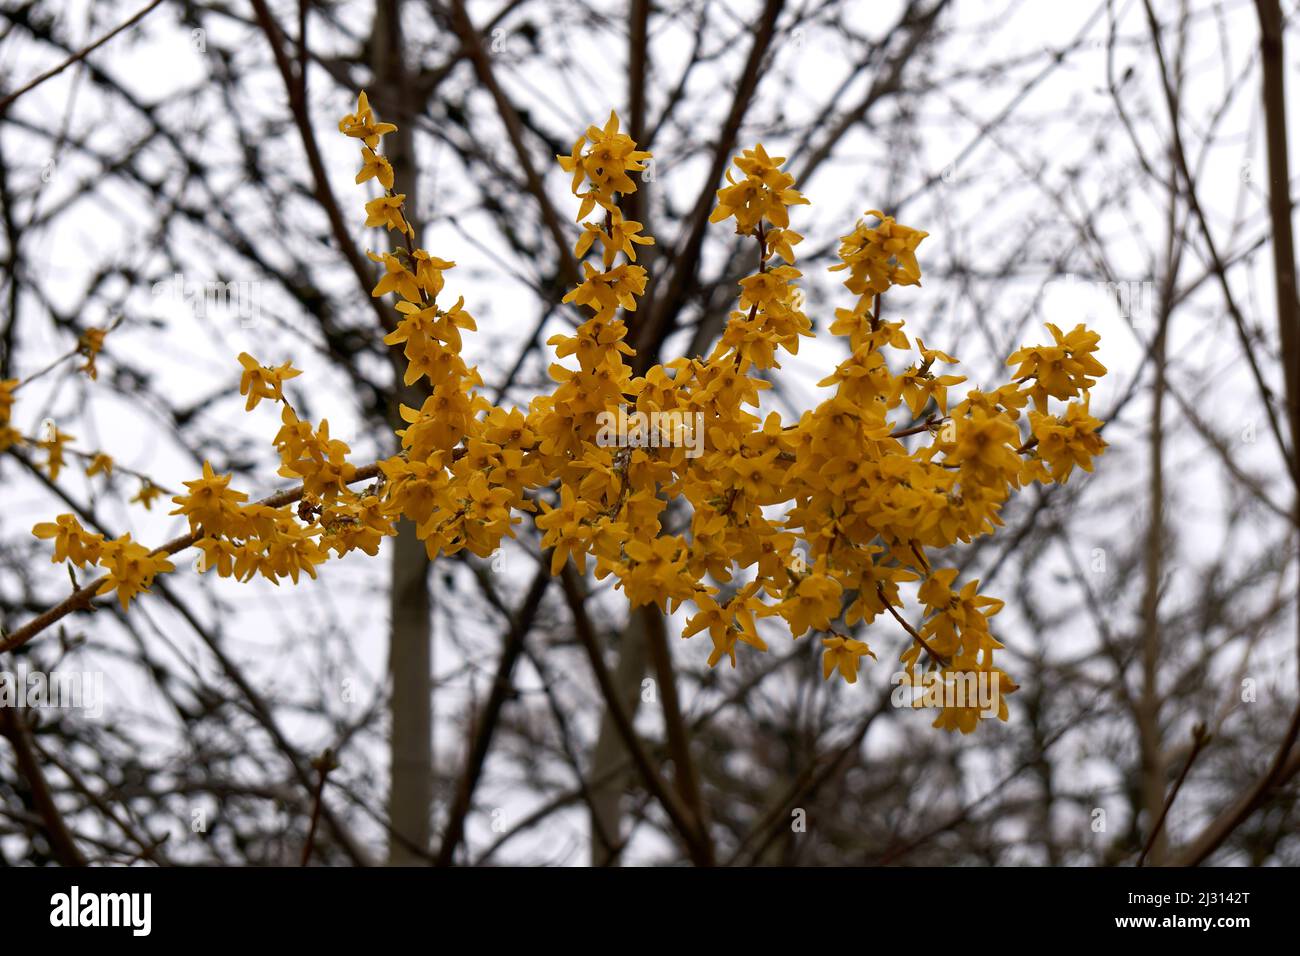 Closeup of Cytisus scoparius or common Scotch broom blooming in spring, isolated branch with bare trees in background, Vancouver, BC, Canada Stock Photo